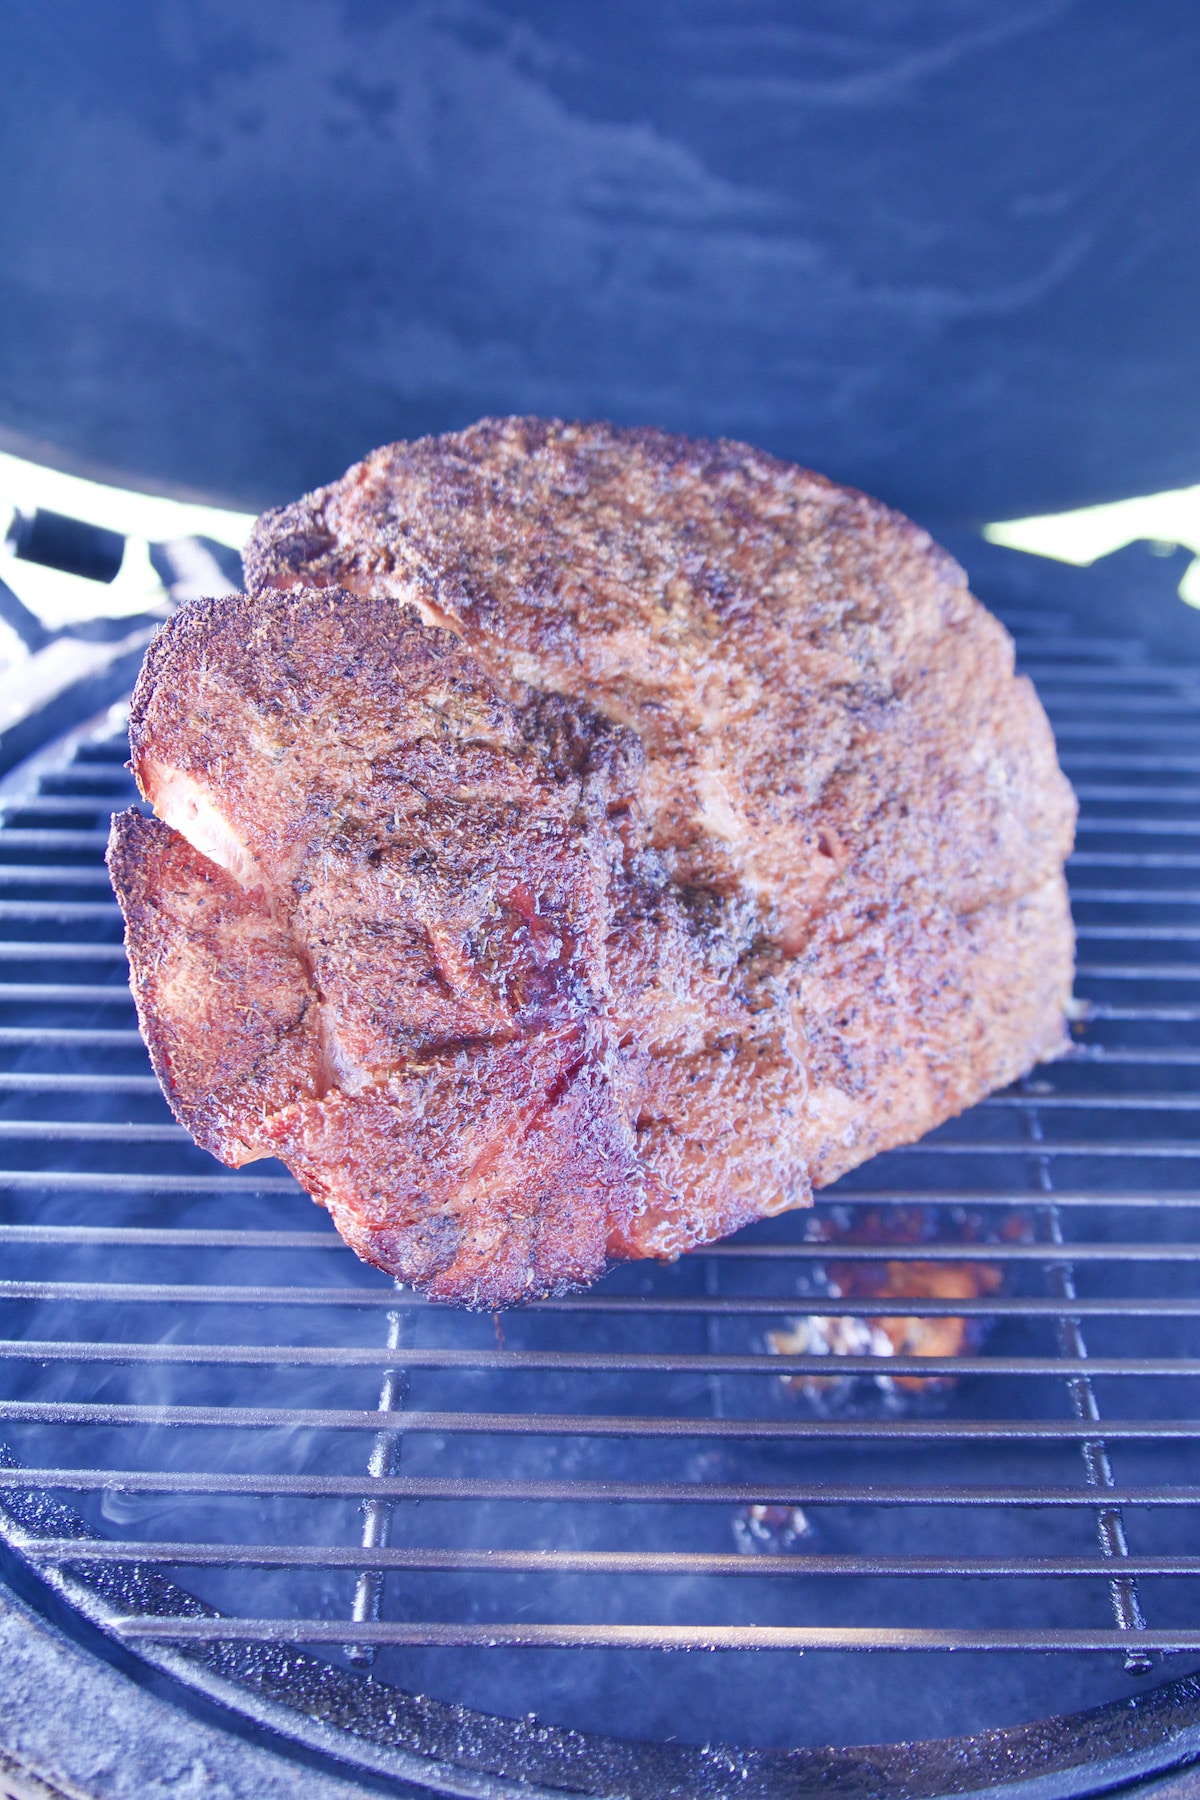 Grilling ham on a big green egg grill.